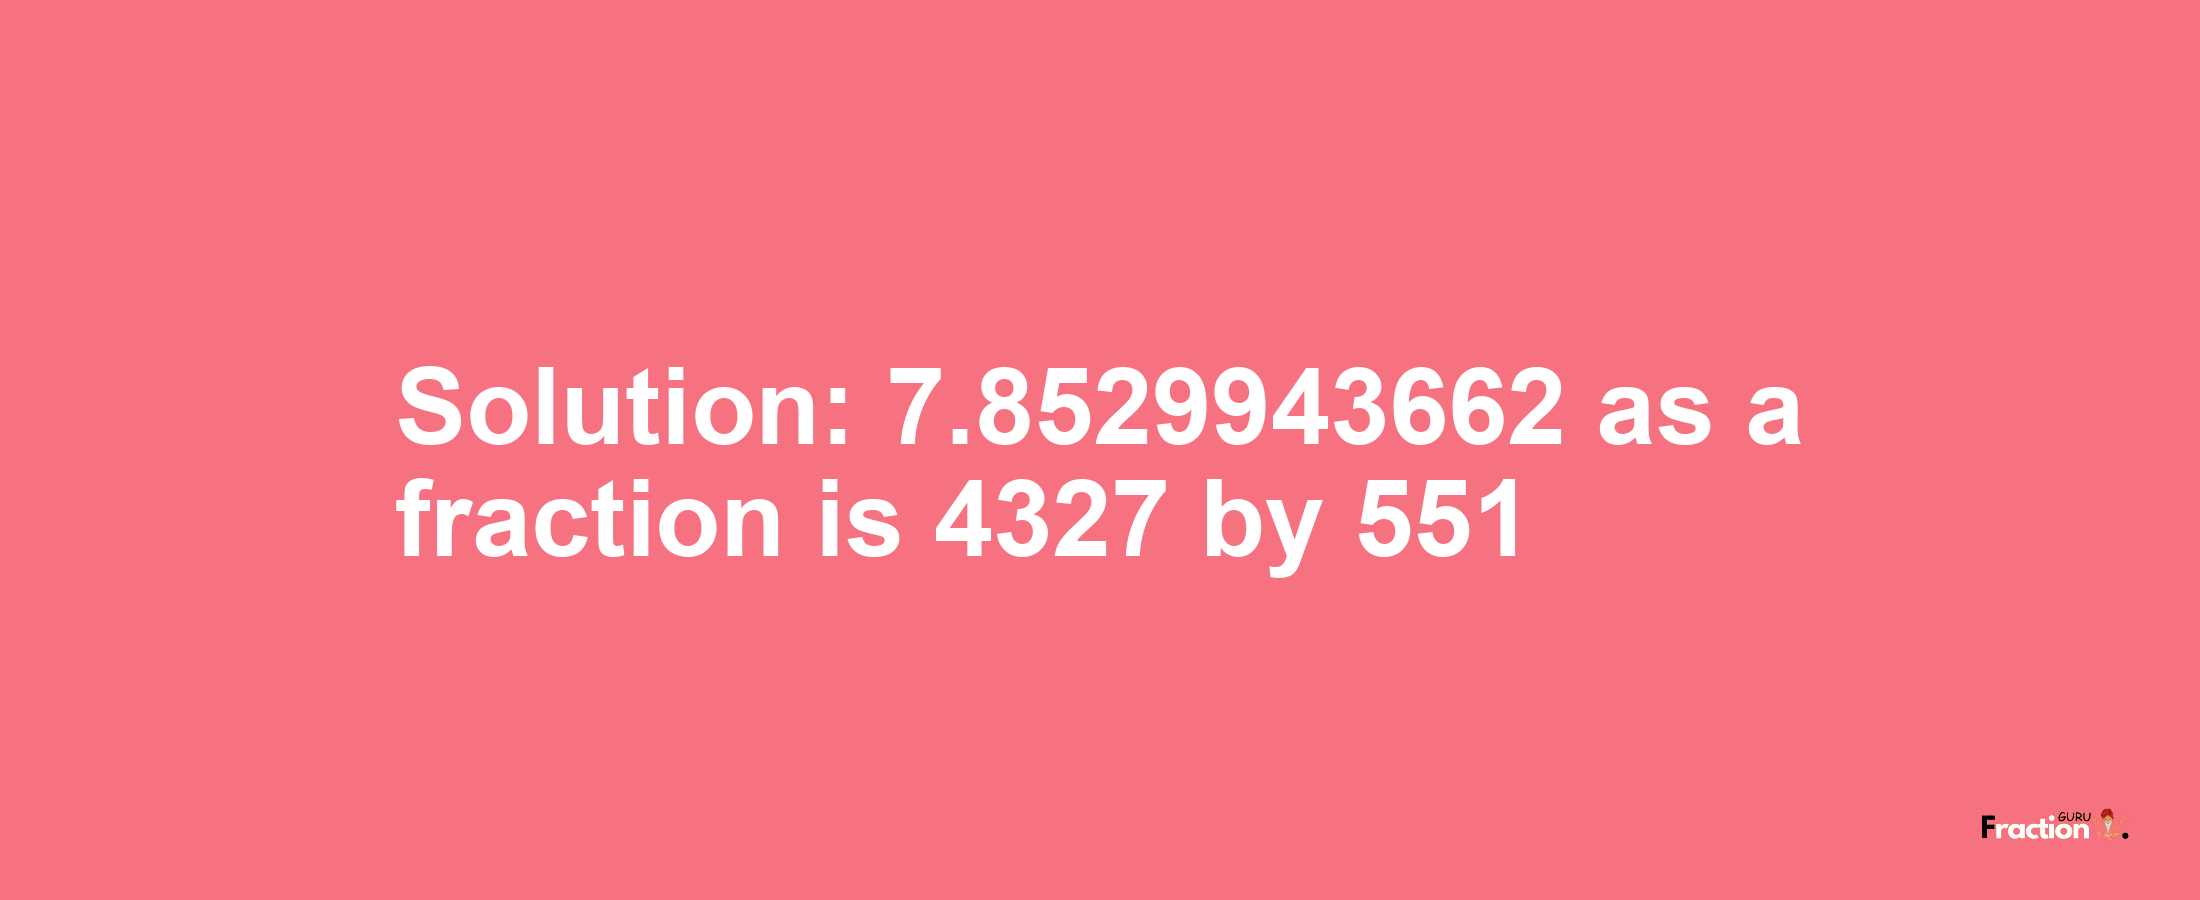 Solution:7.8529943662 as a fraction is 4327/551